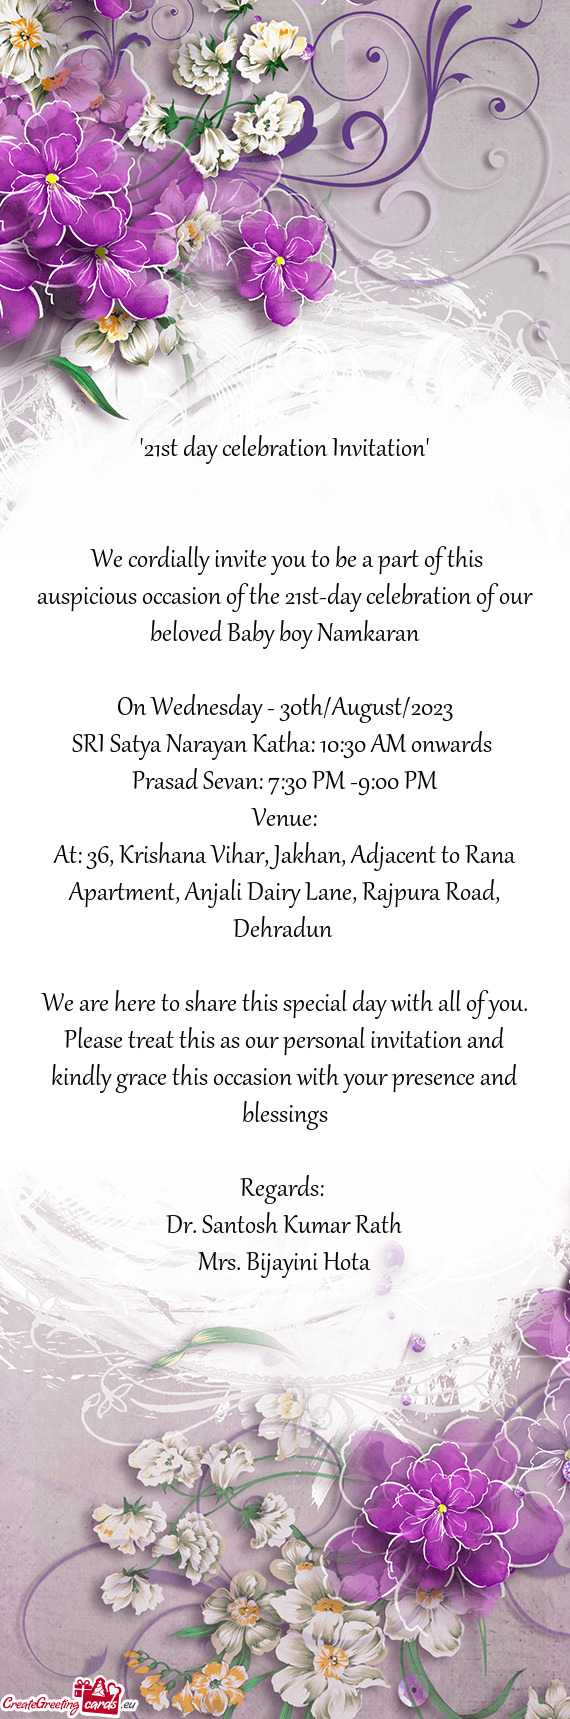 We cordially invite you to be a part of this auspicious occasion of the 21st-day celebration of our